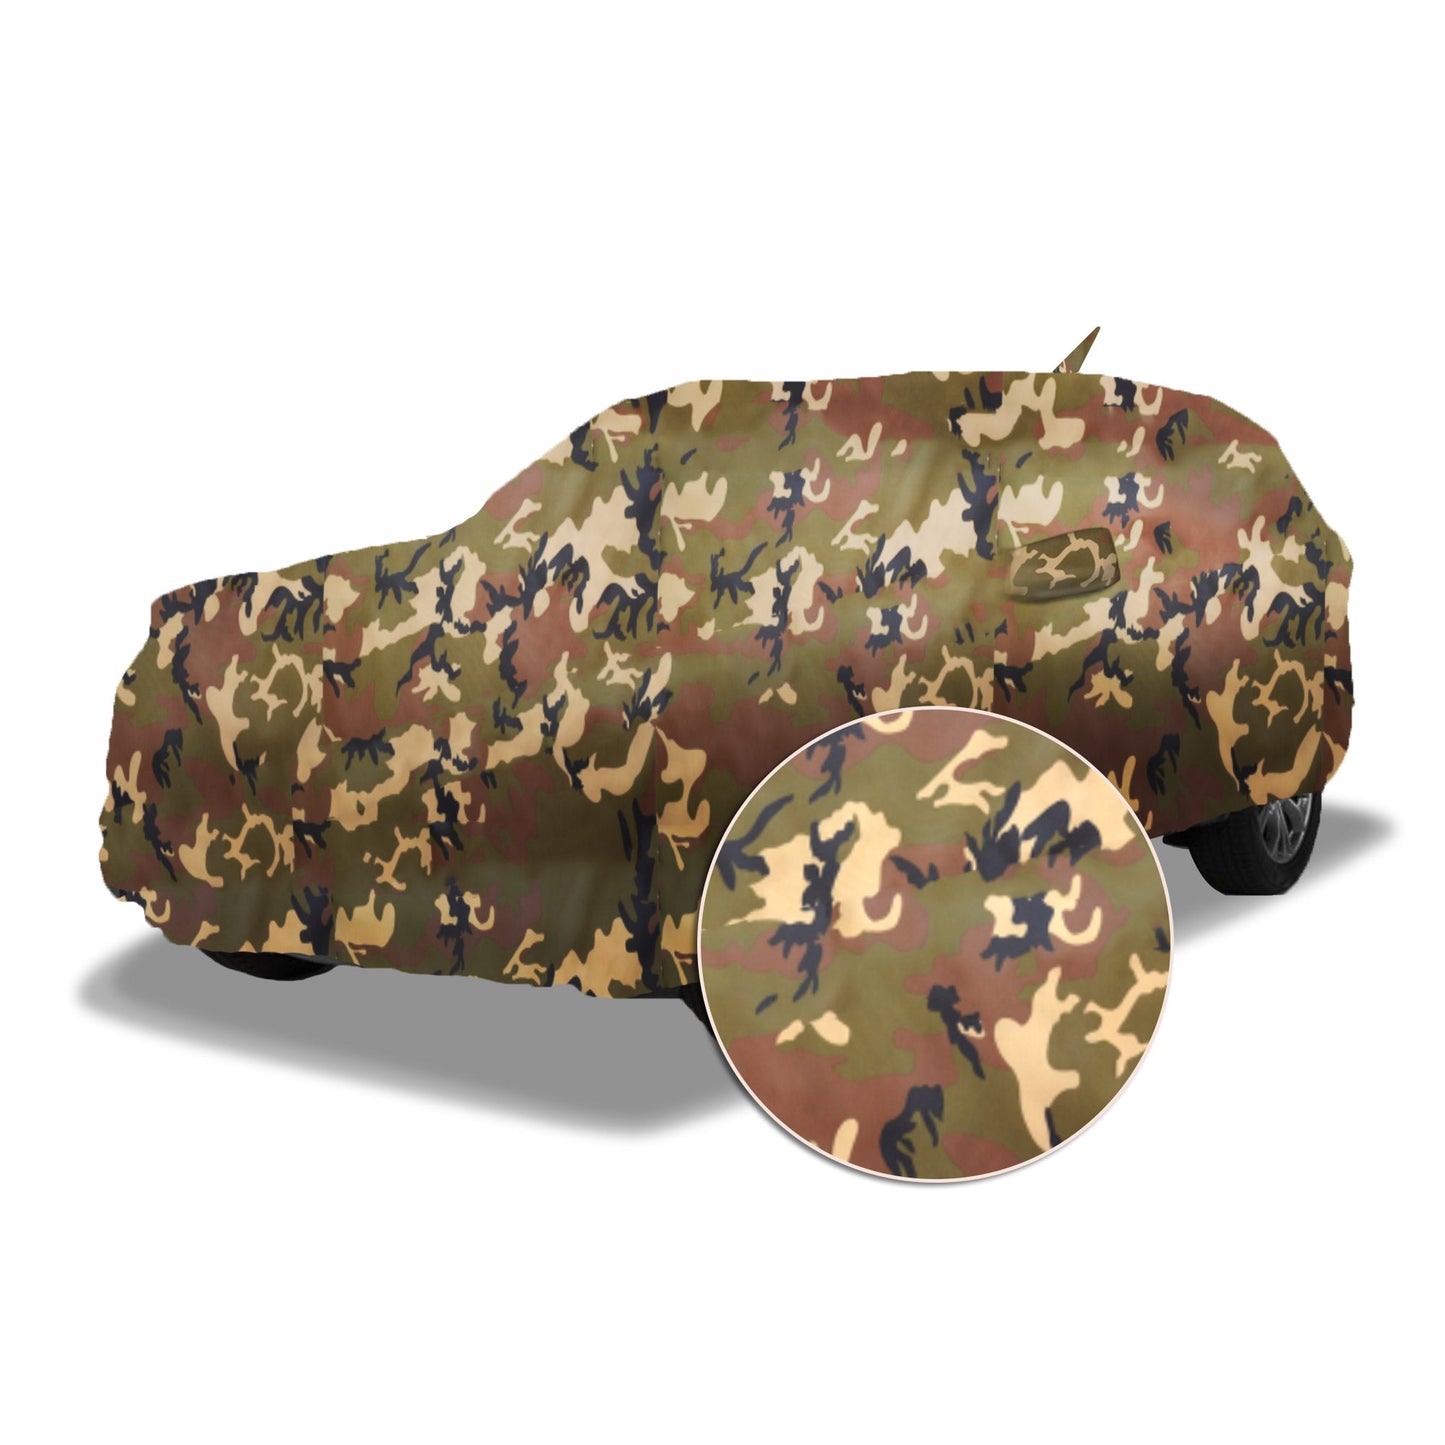 Ascot MG Astor Car Body Cover Extra Strong & Dust Proof Jungle Military Car Cover with UV Proof & Water-Resistant Coating